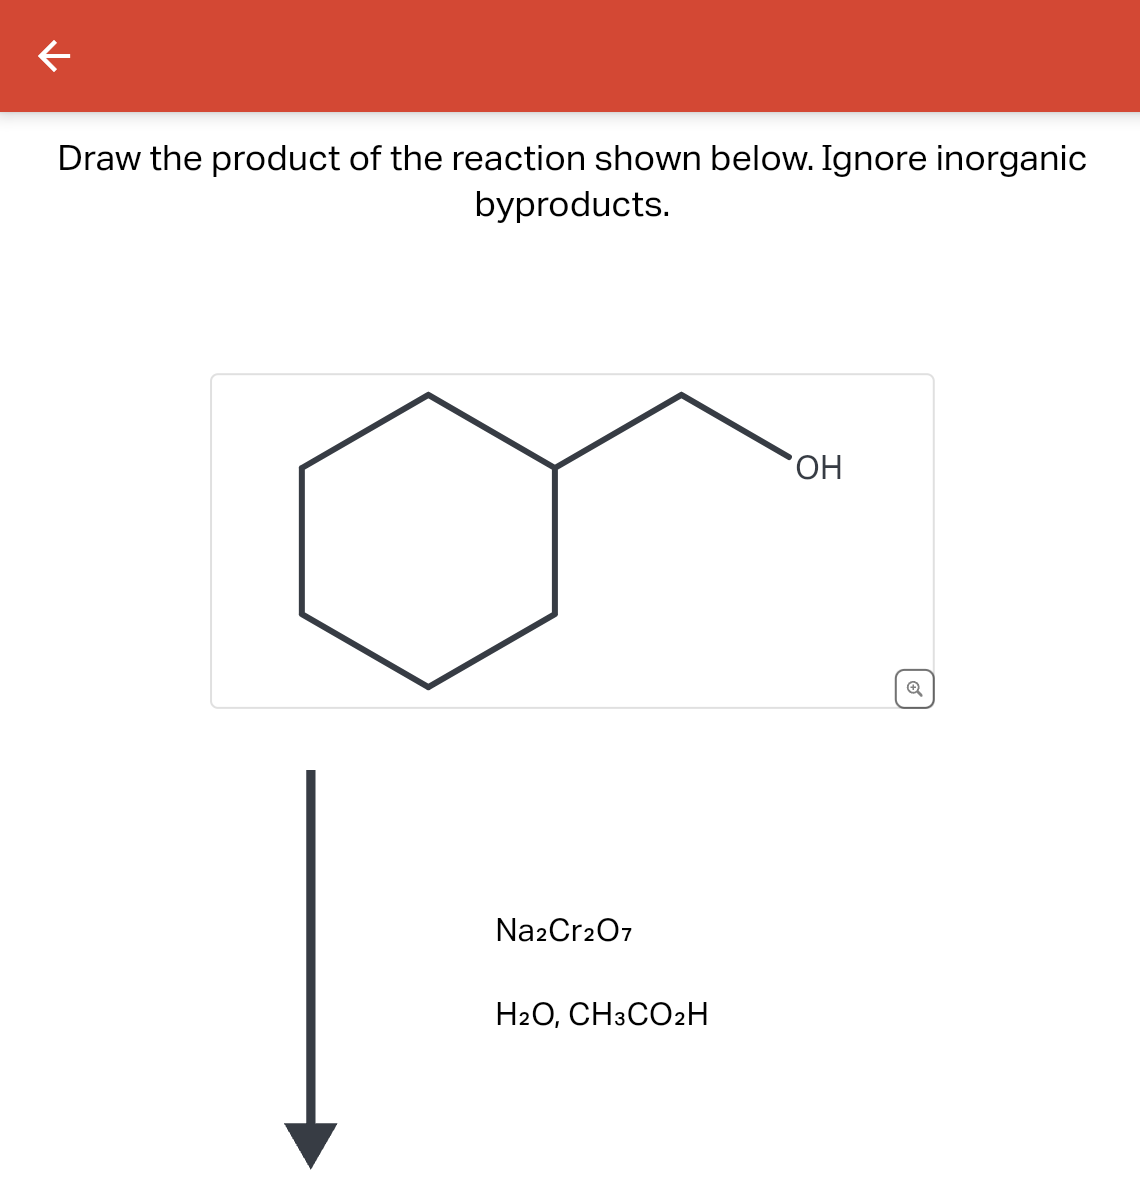 K
Draw the product of the reaction shown below. Ignore inorganic
byproducts.
Na2Cr2O7
H2O, CH3CO2H
OH
Q